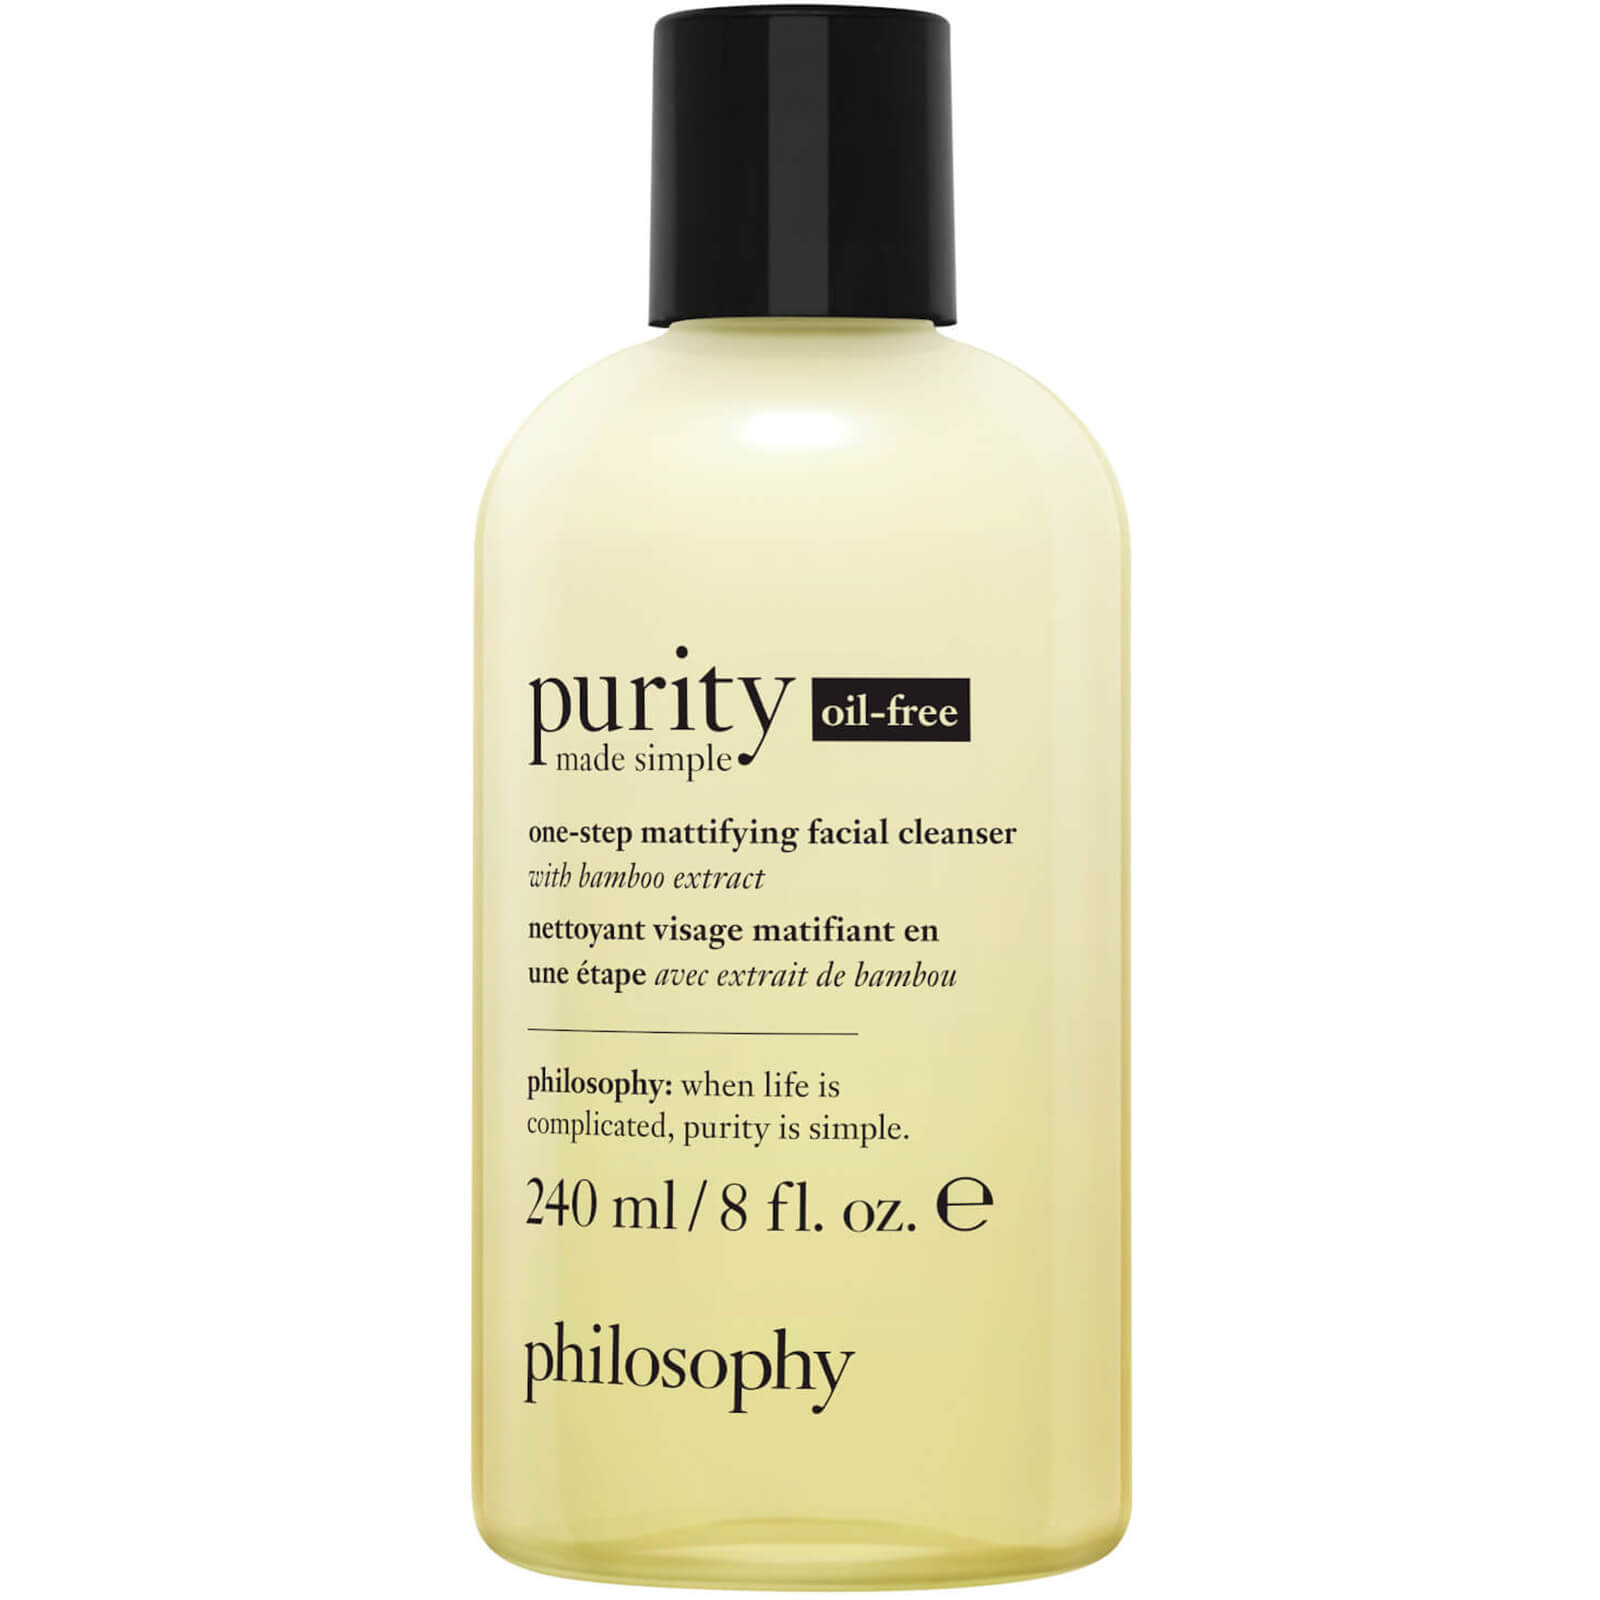 Photos - Facial / Body Cleansing Product Philosophy Purity Made Simple Oil-Free Cleanser 240ml 99350069805 